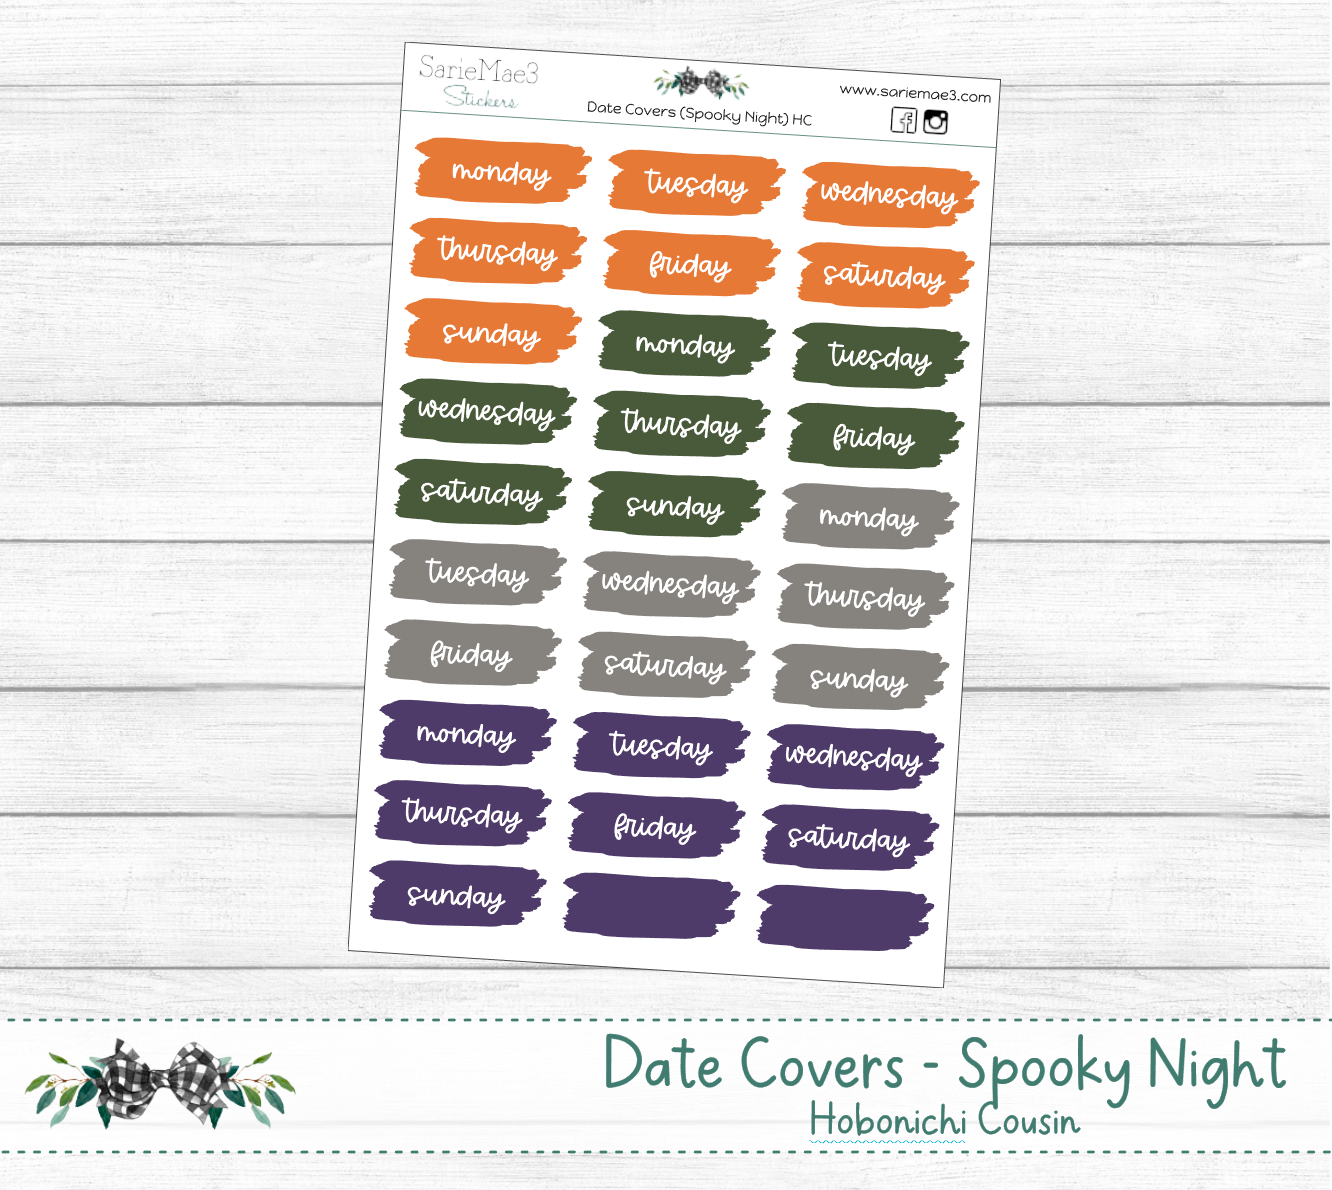 Date Covers (Spooky Night) Hobo Cousin